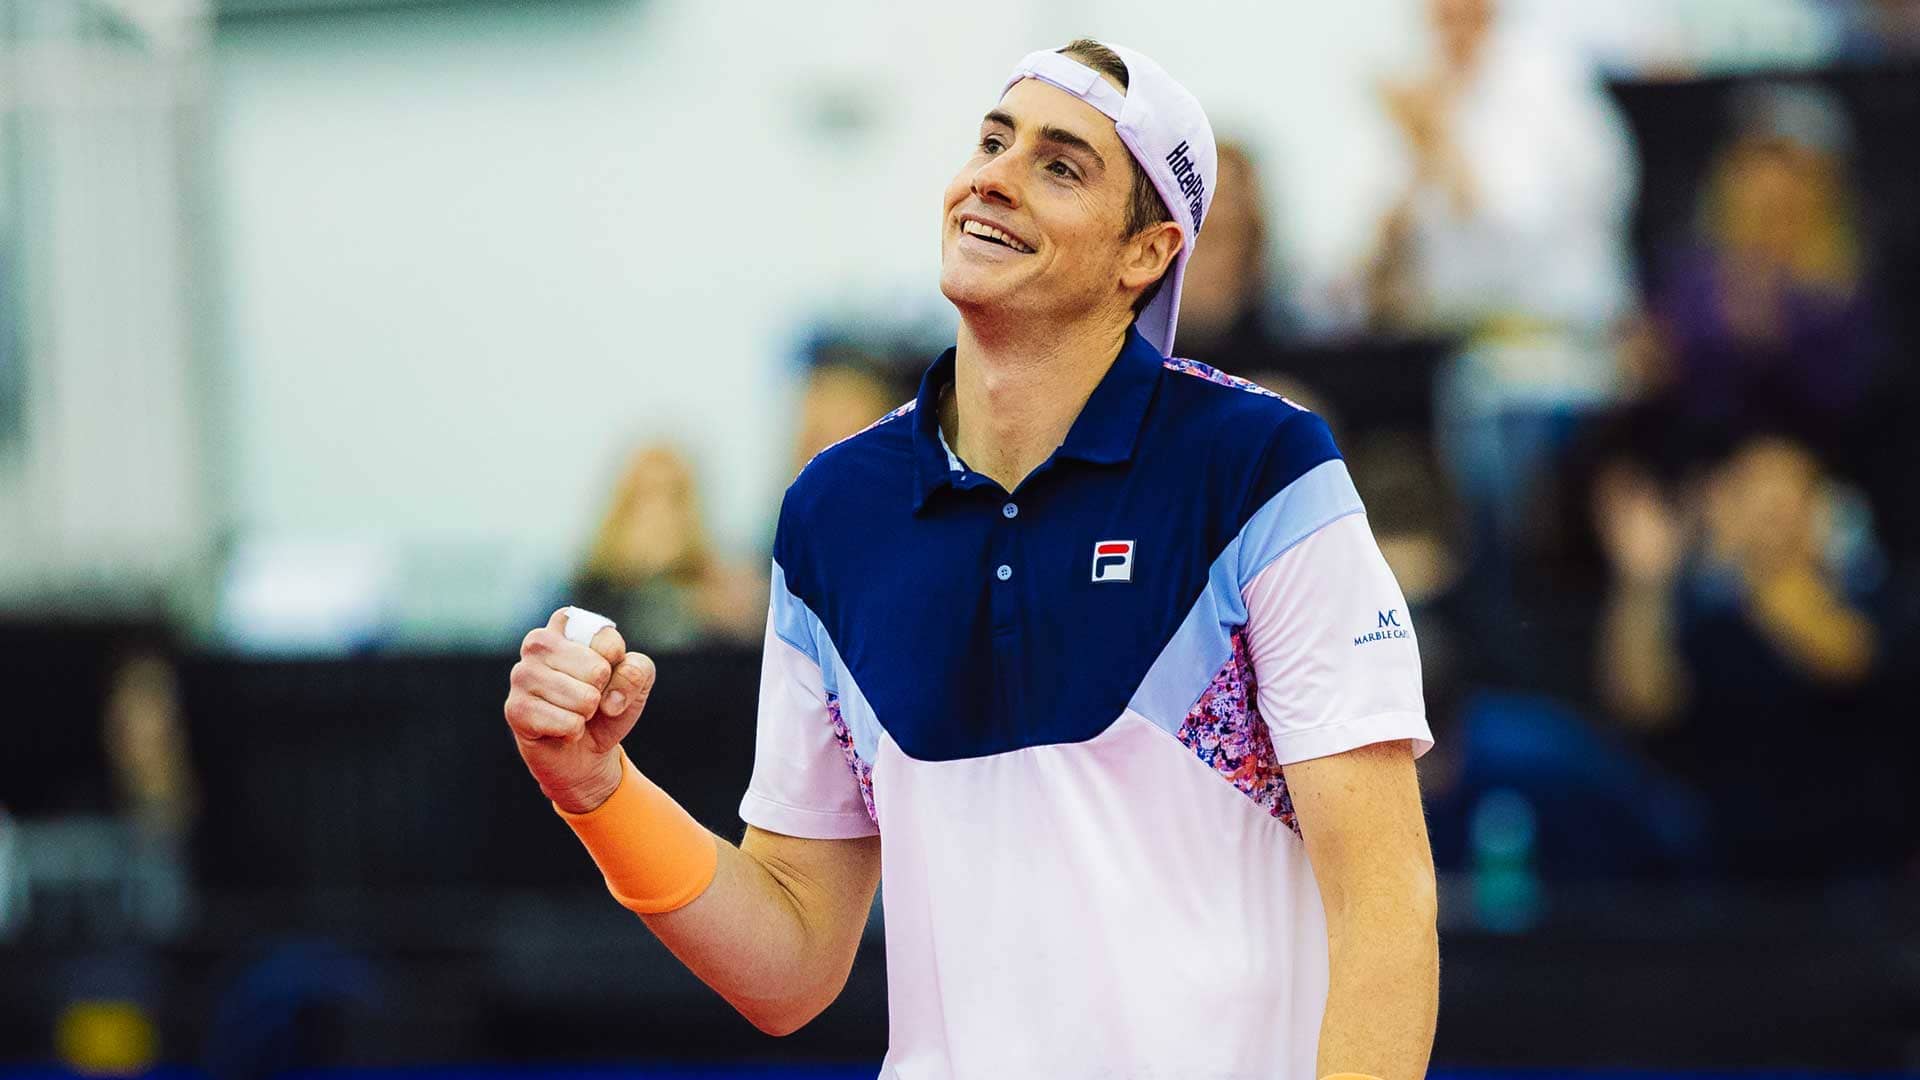 John Isner hits 31 aces and wins his 501st career tie-break to advance to the Dallas final.